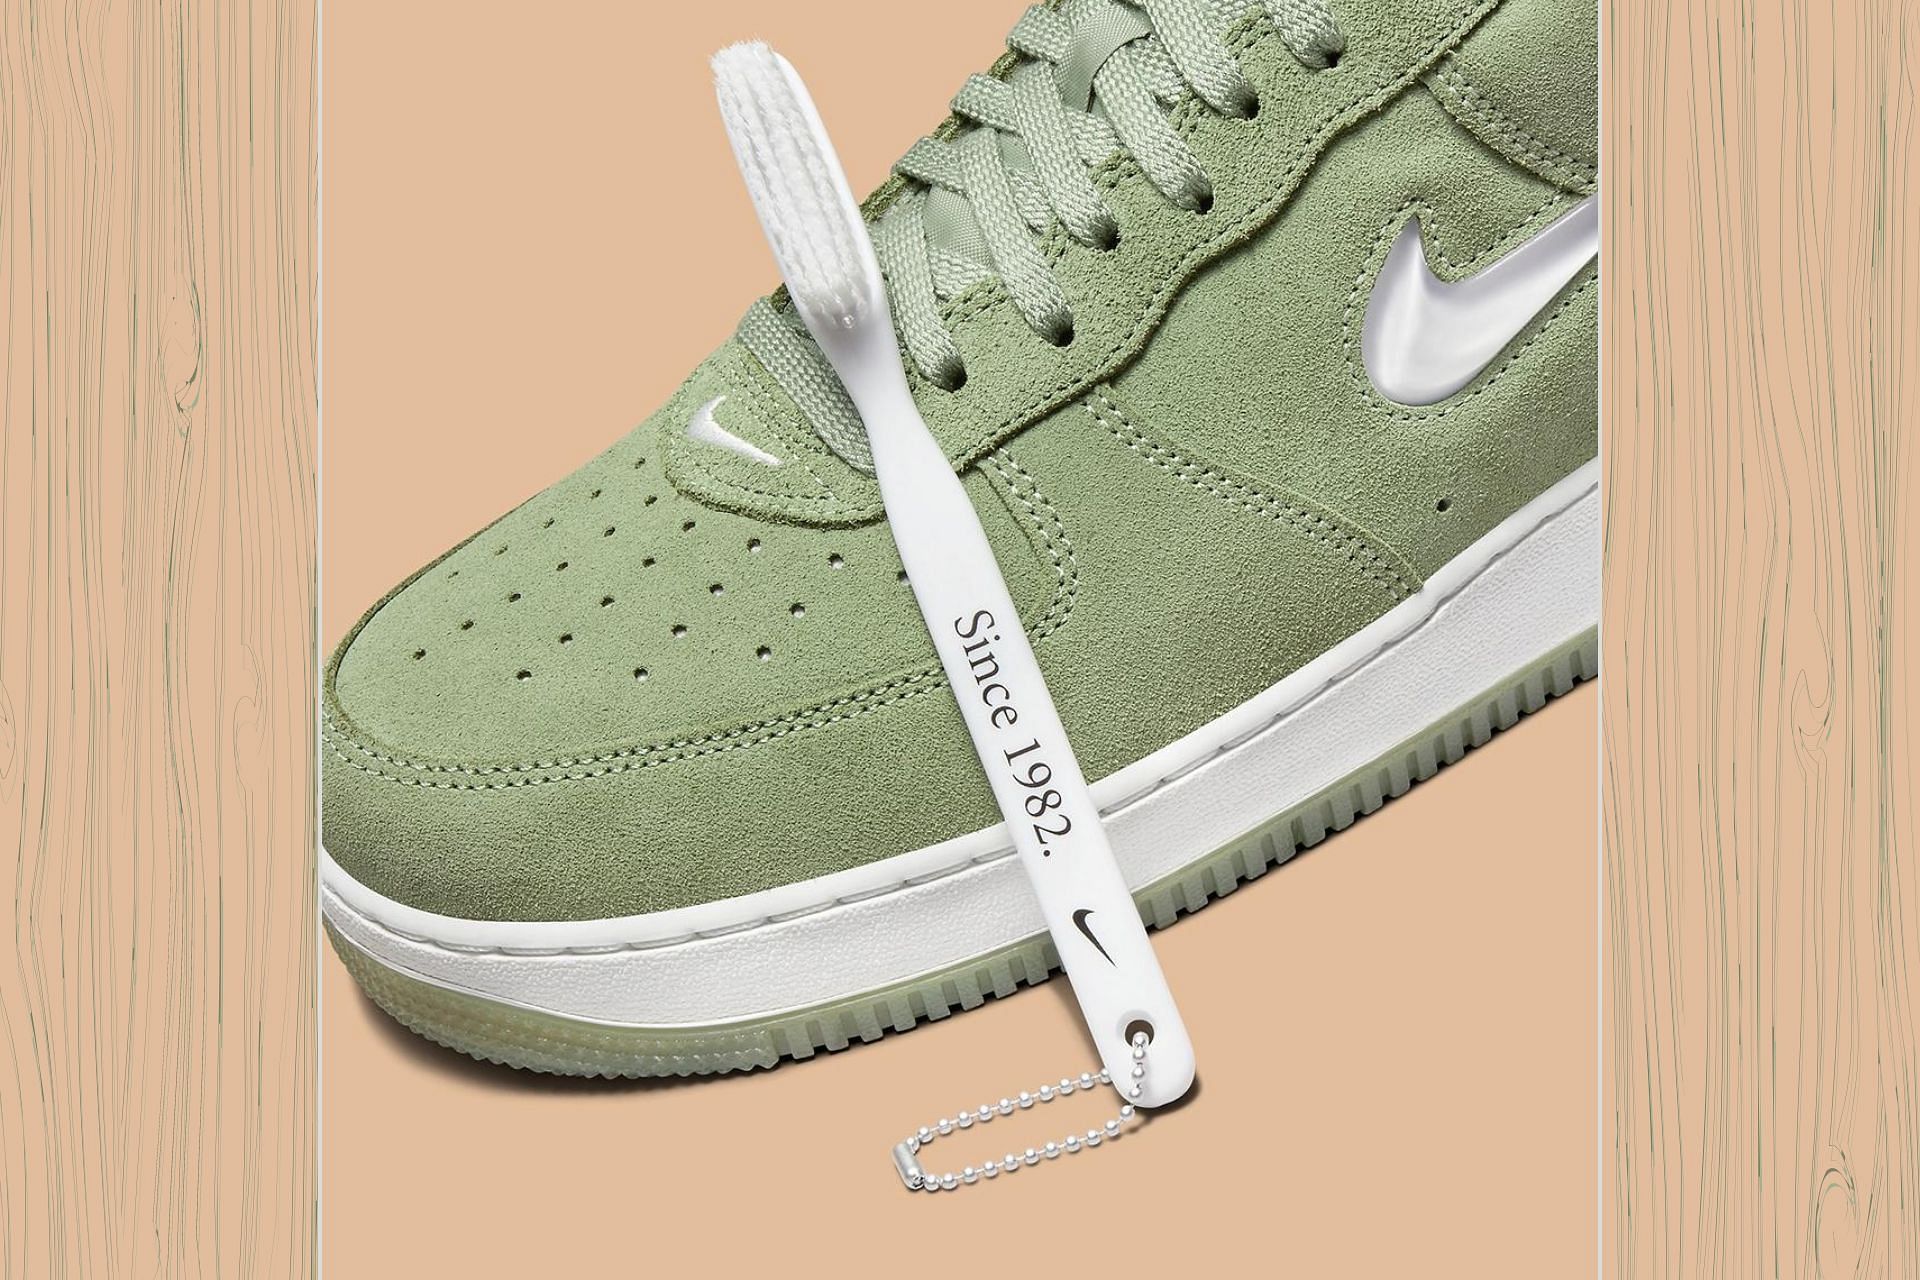 Nike Air Force 1 Low Color of the Month Matcha Green colorway (Image via Nike)